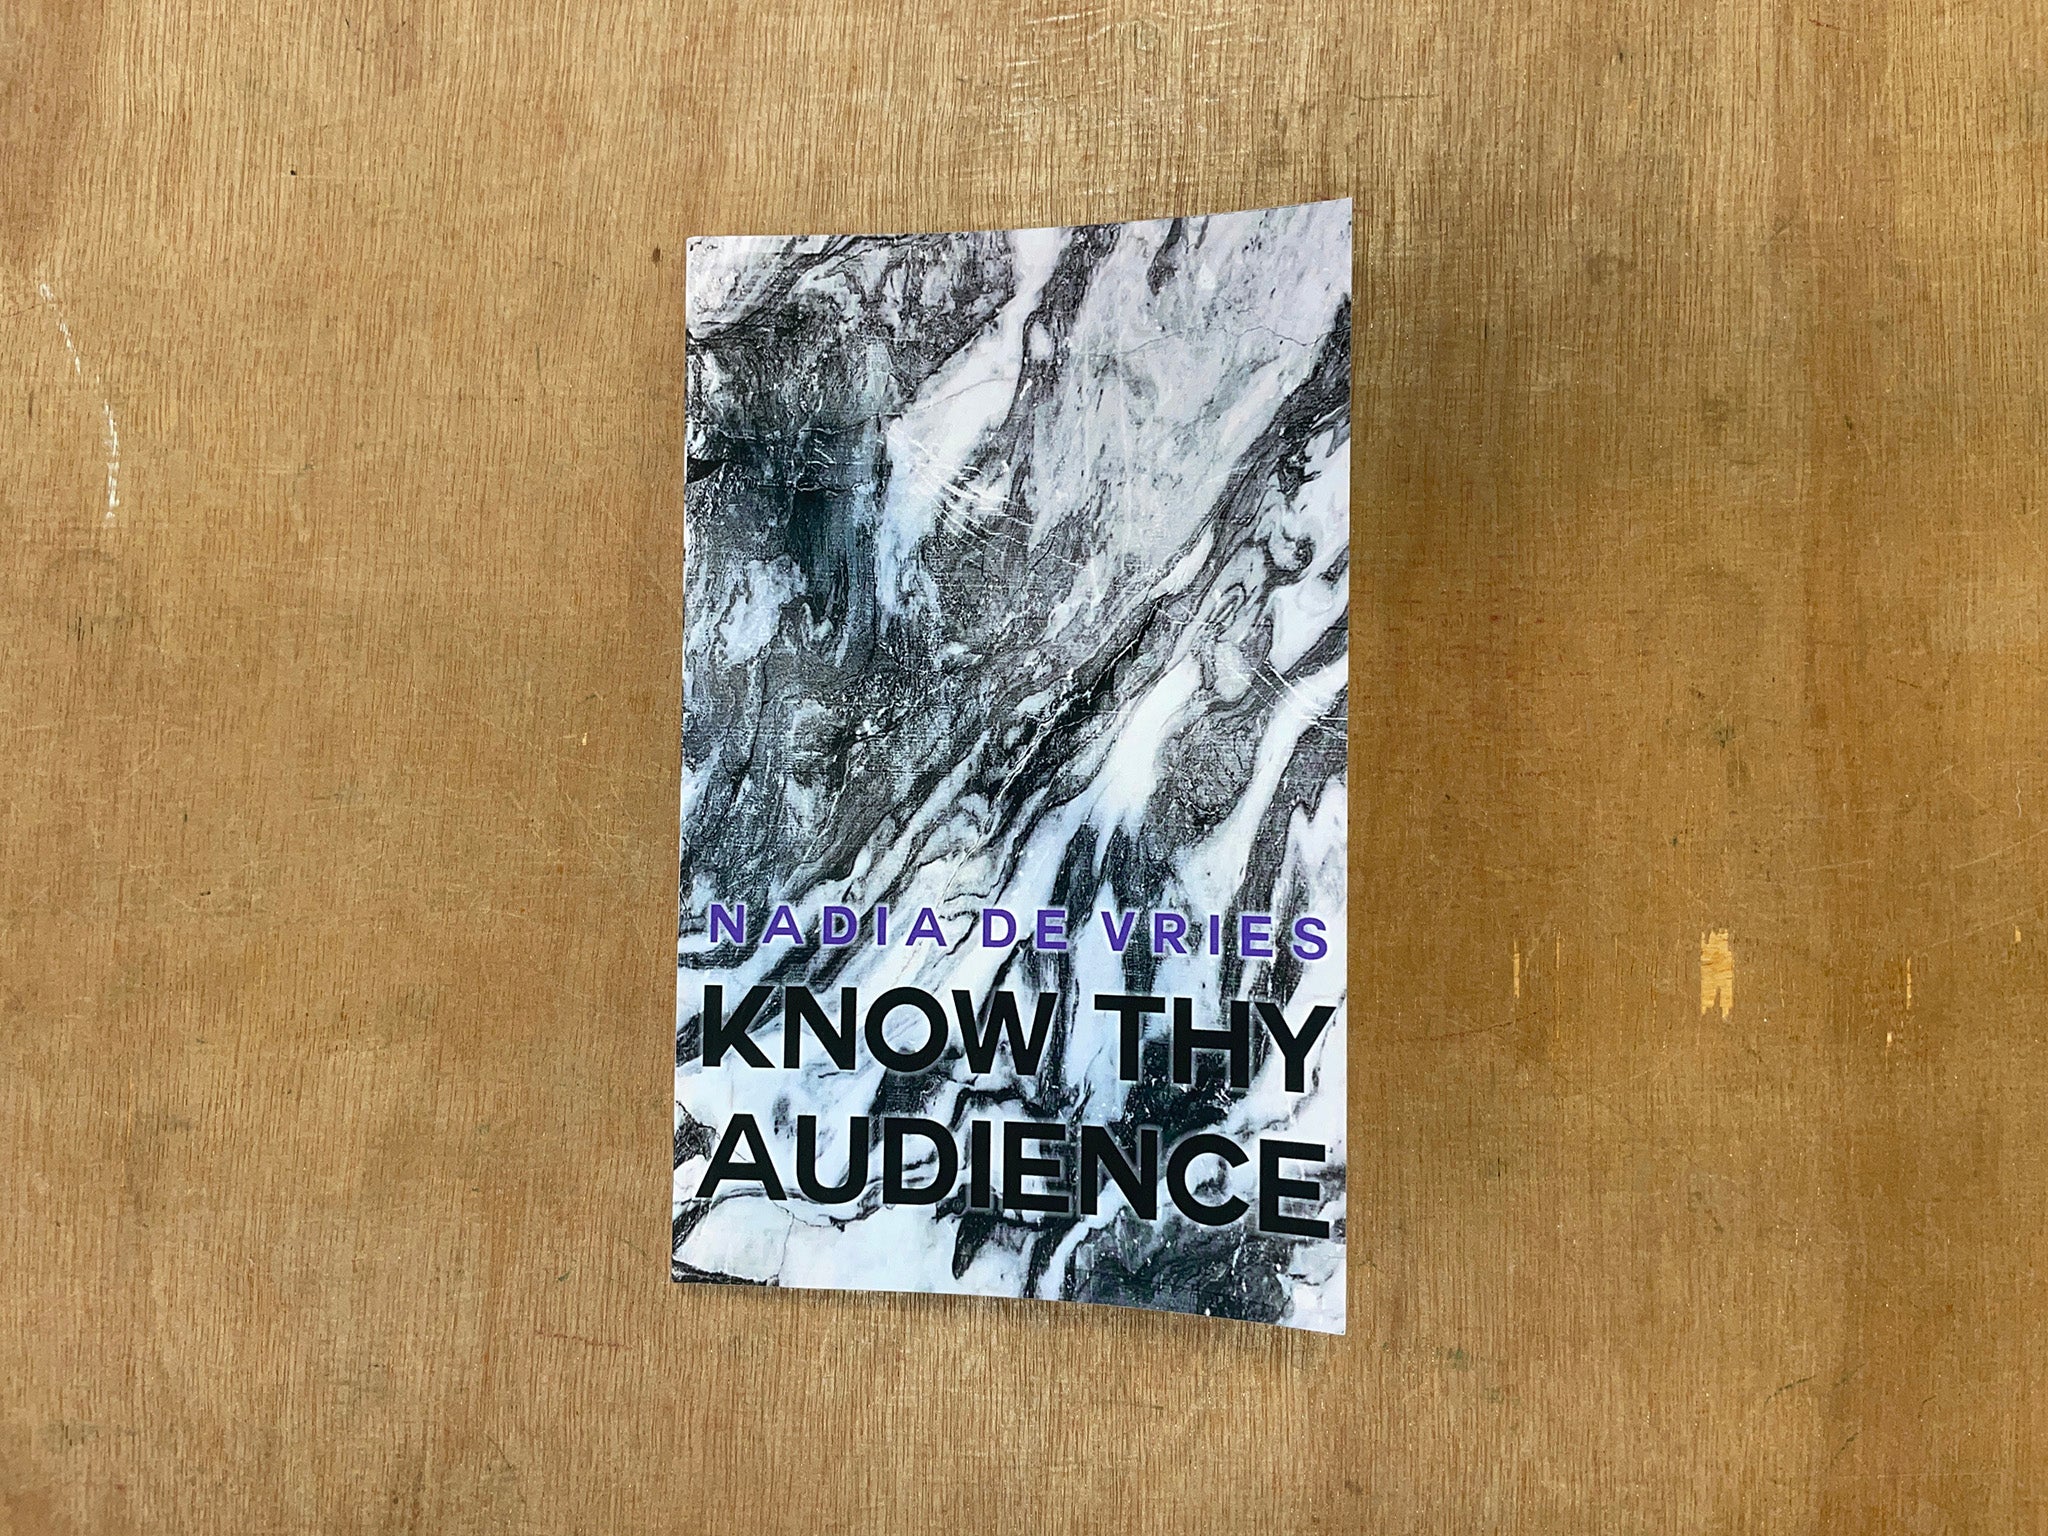 KNOW THY AUDIENCE by Nadia de Vries